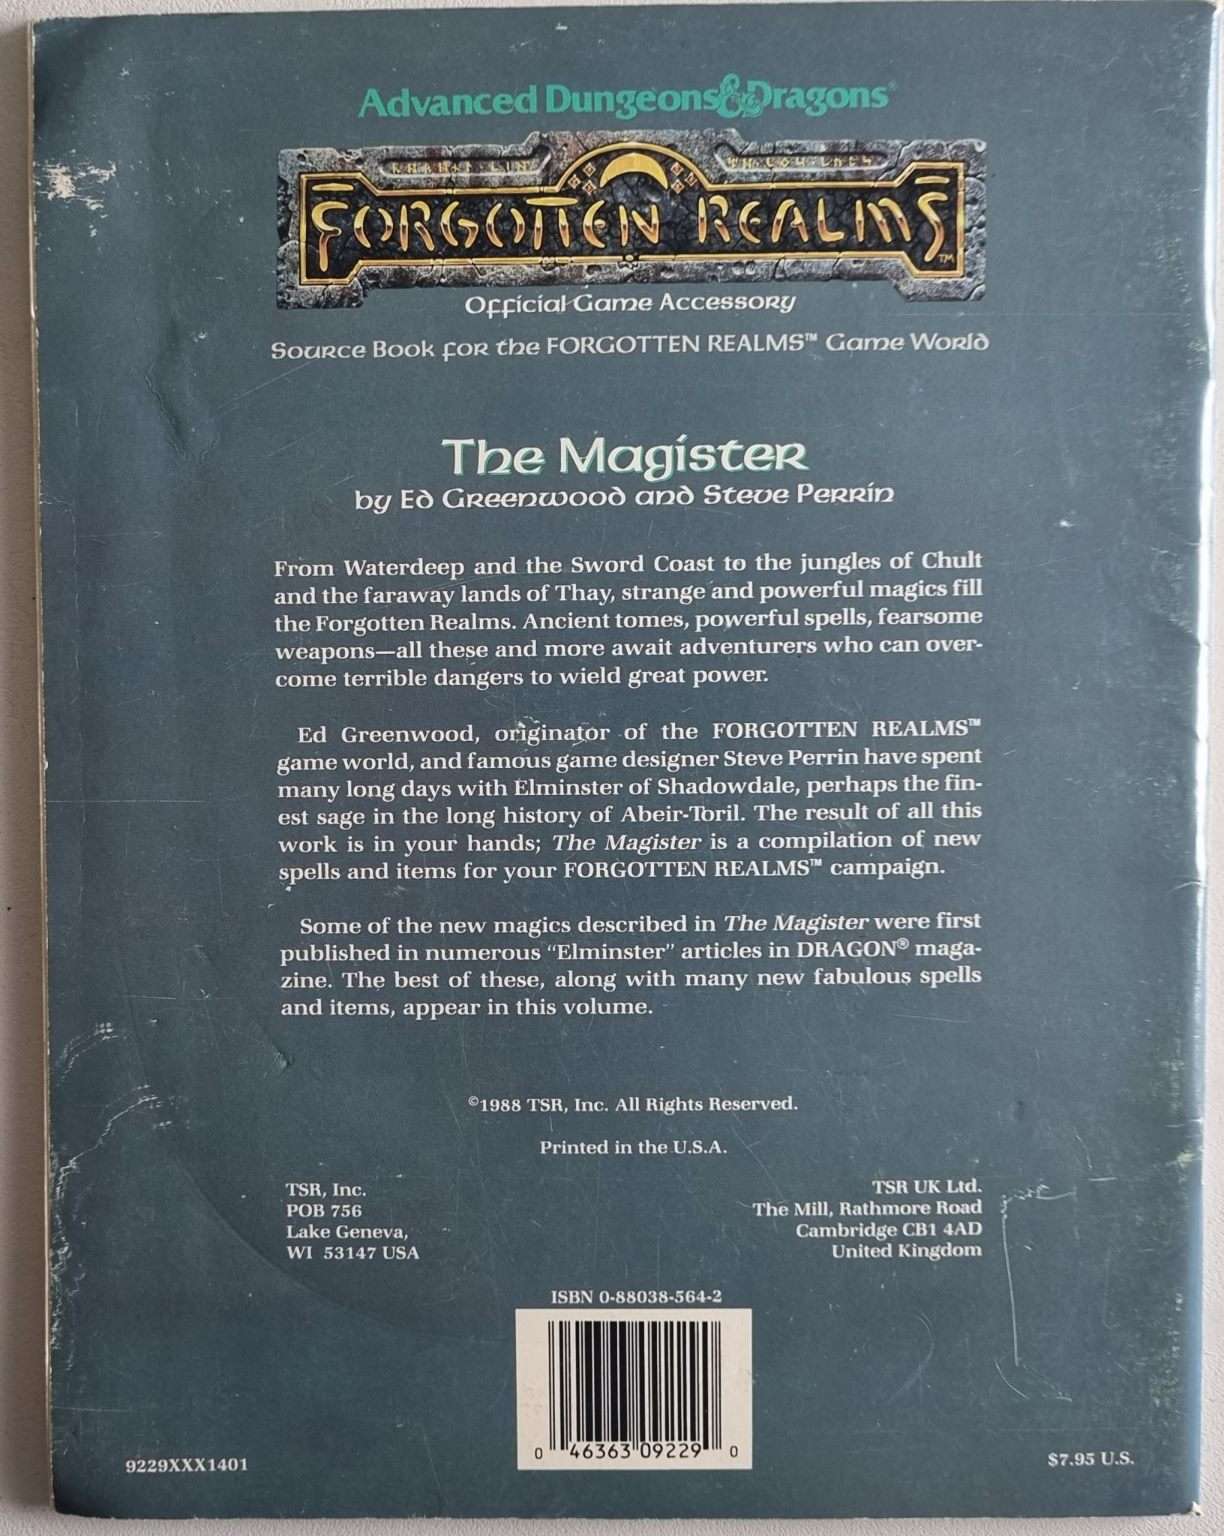 Advanced Dungeons and Dragons - Forgotten Realms - The Magister (FR4 9229) Default Title